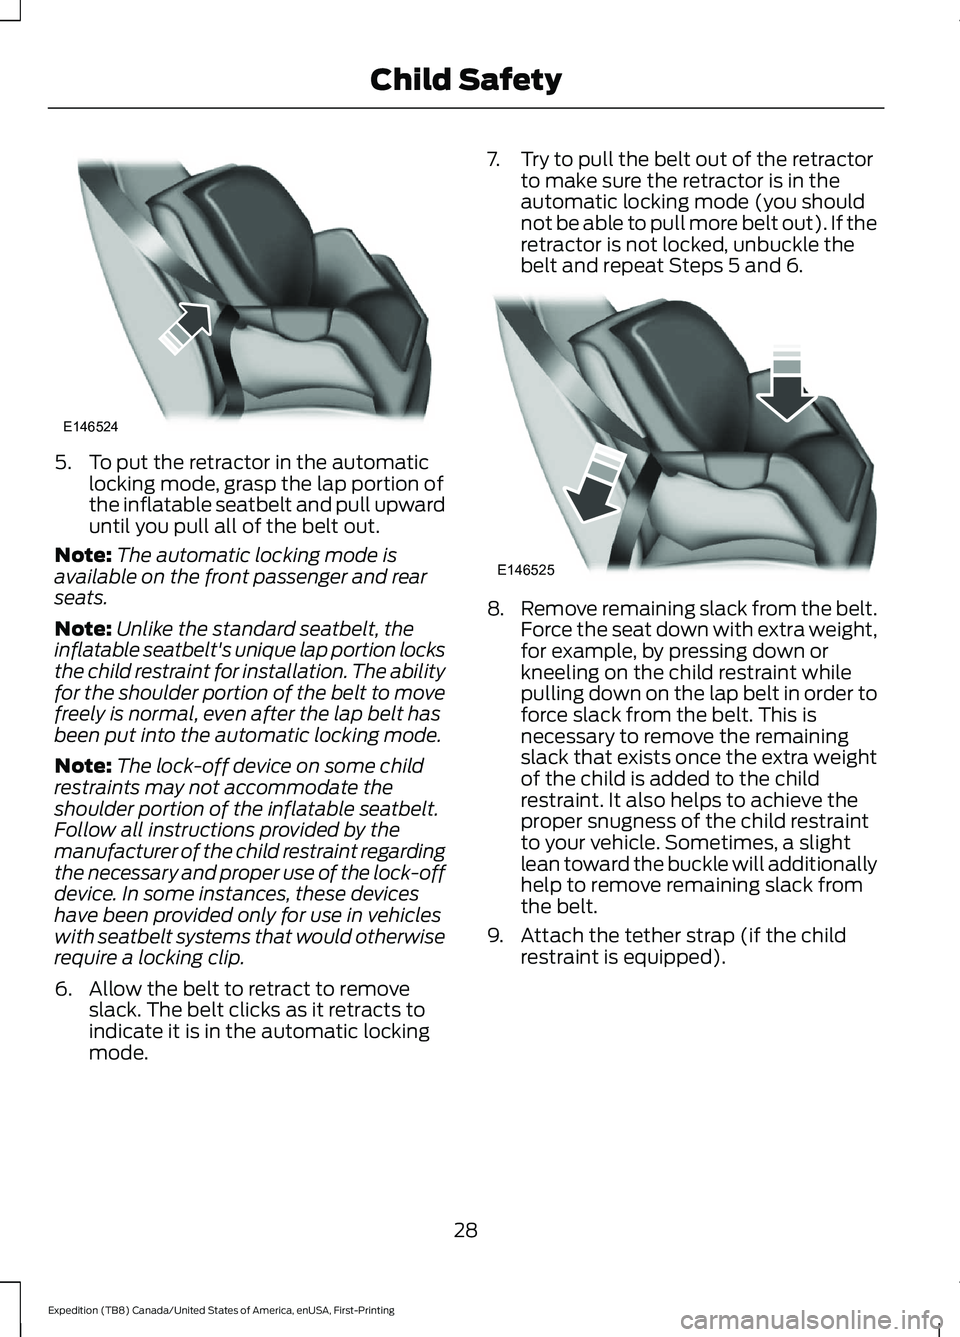 FORD EXPEDITION 2021 Owners Guide 5. To put the retractor in the automatic
locking mode, grasp the lap portion of
the inflatable seatbelt and pull upward
until you pull all of the belt out.
Note: The automatic locking mode is
availabl